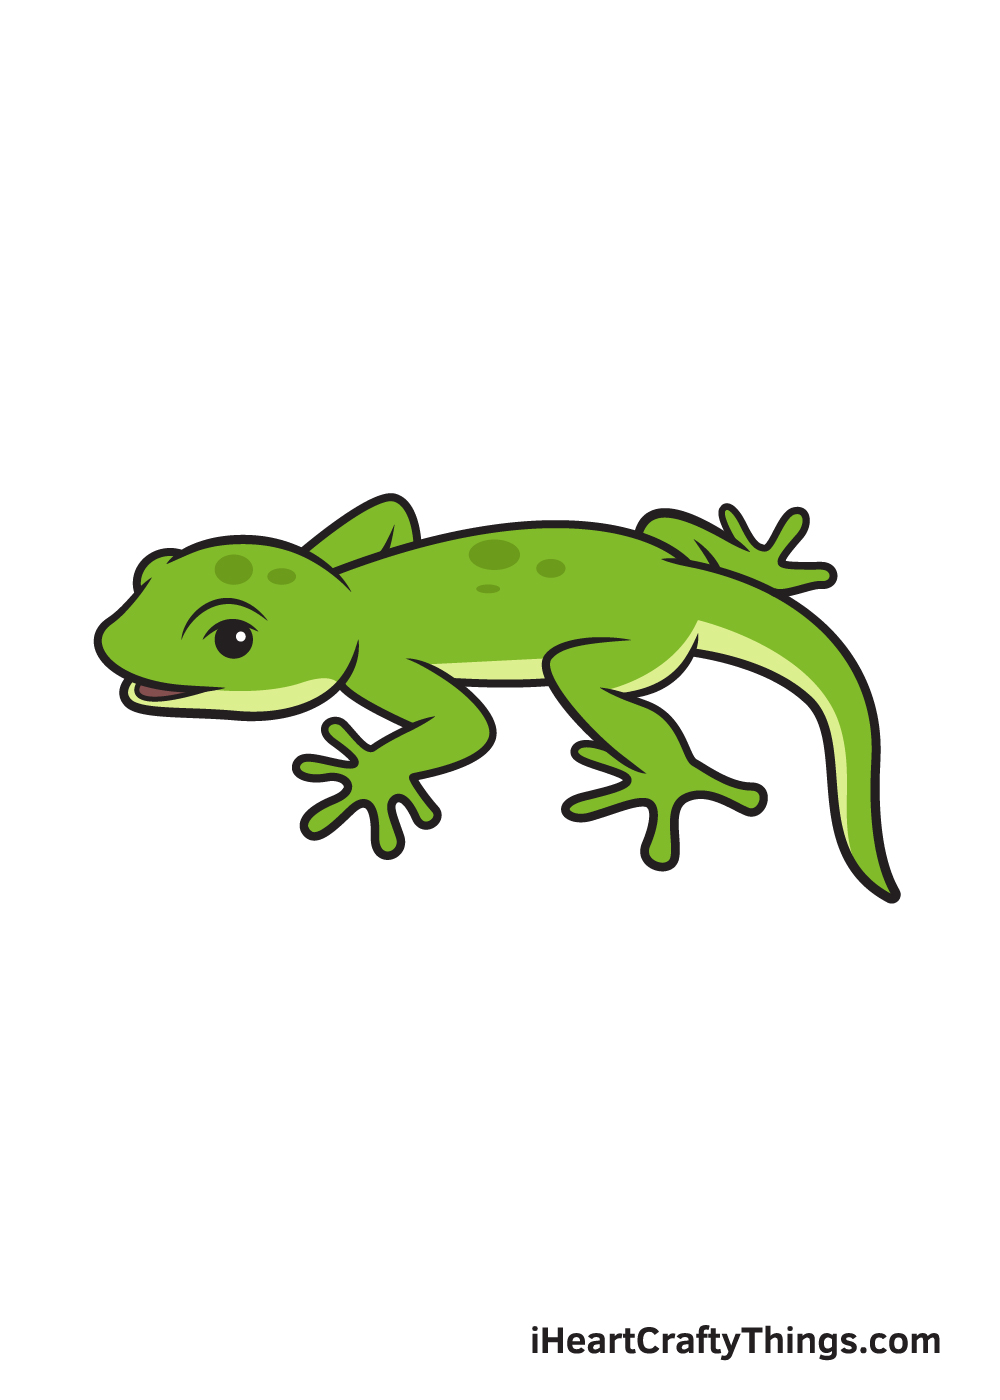 Lizard Drawing — How To Draw A Lizard Step By Step